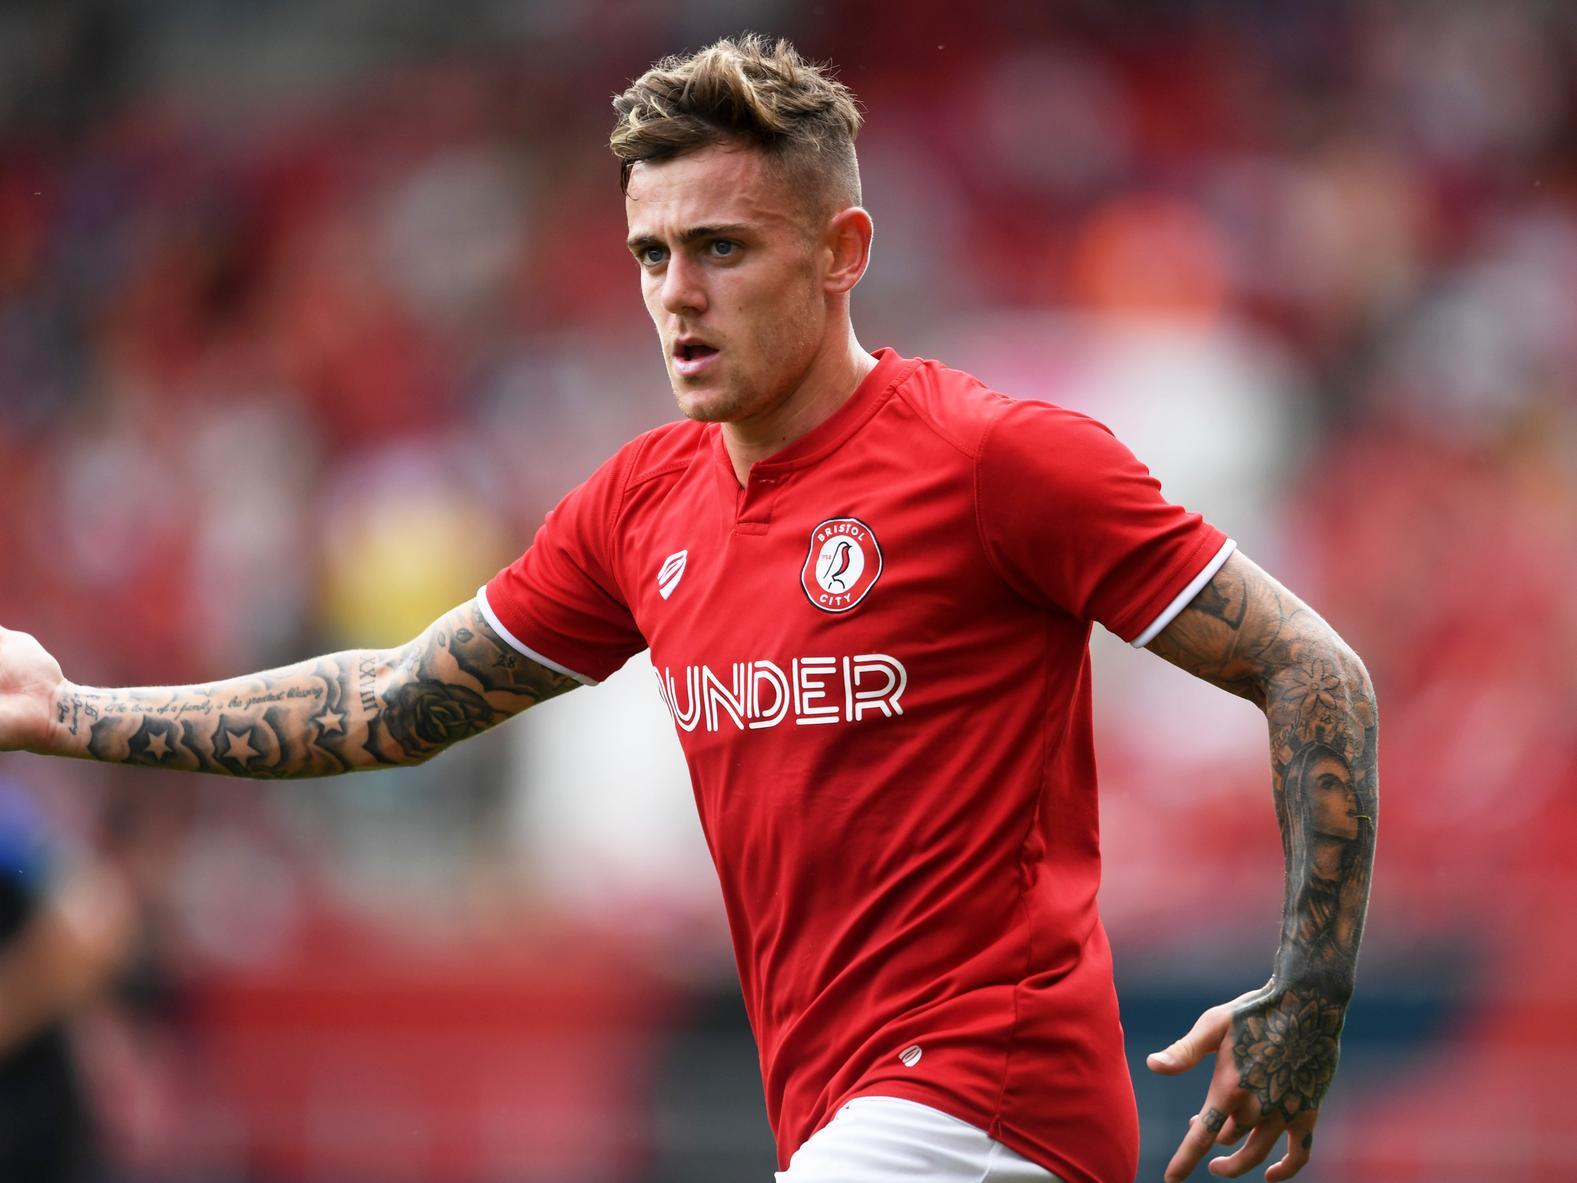 Ipswich Town are showing an interest in signing Bristol City forward Sammie Szmodics ahead with Championship pair Huddersfield Town and Hull City also keen. (East Anglian Daily Times)